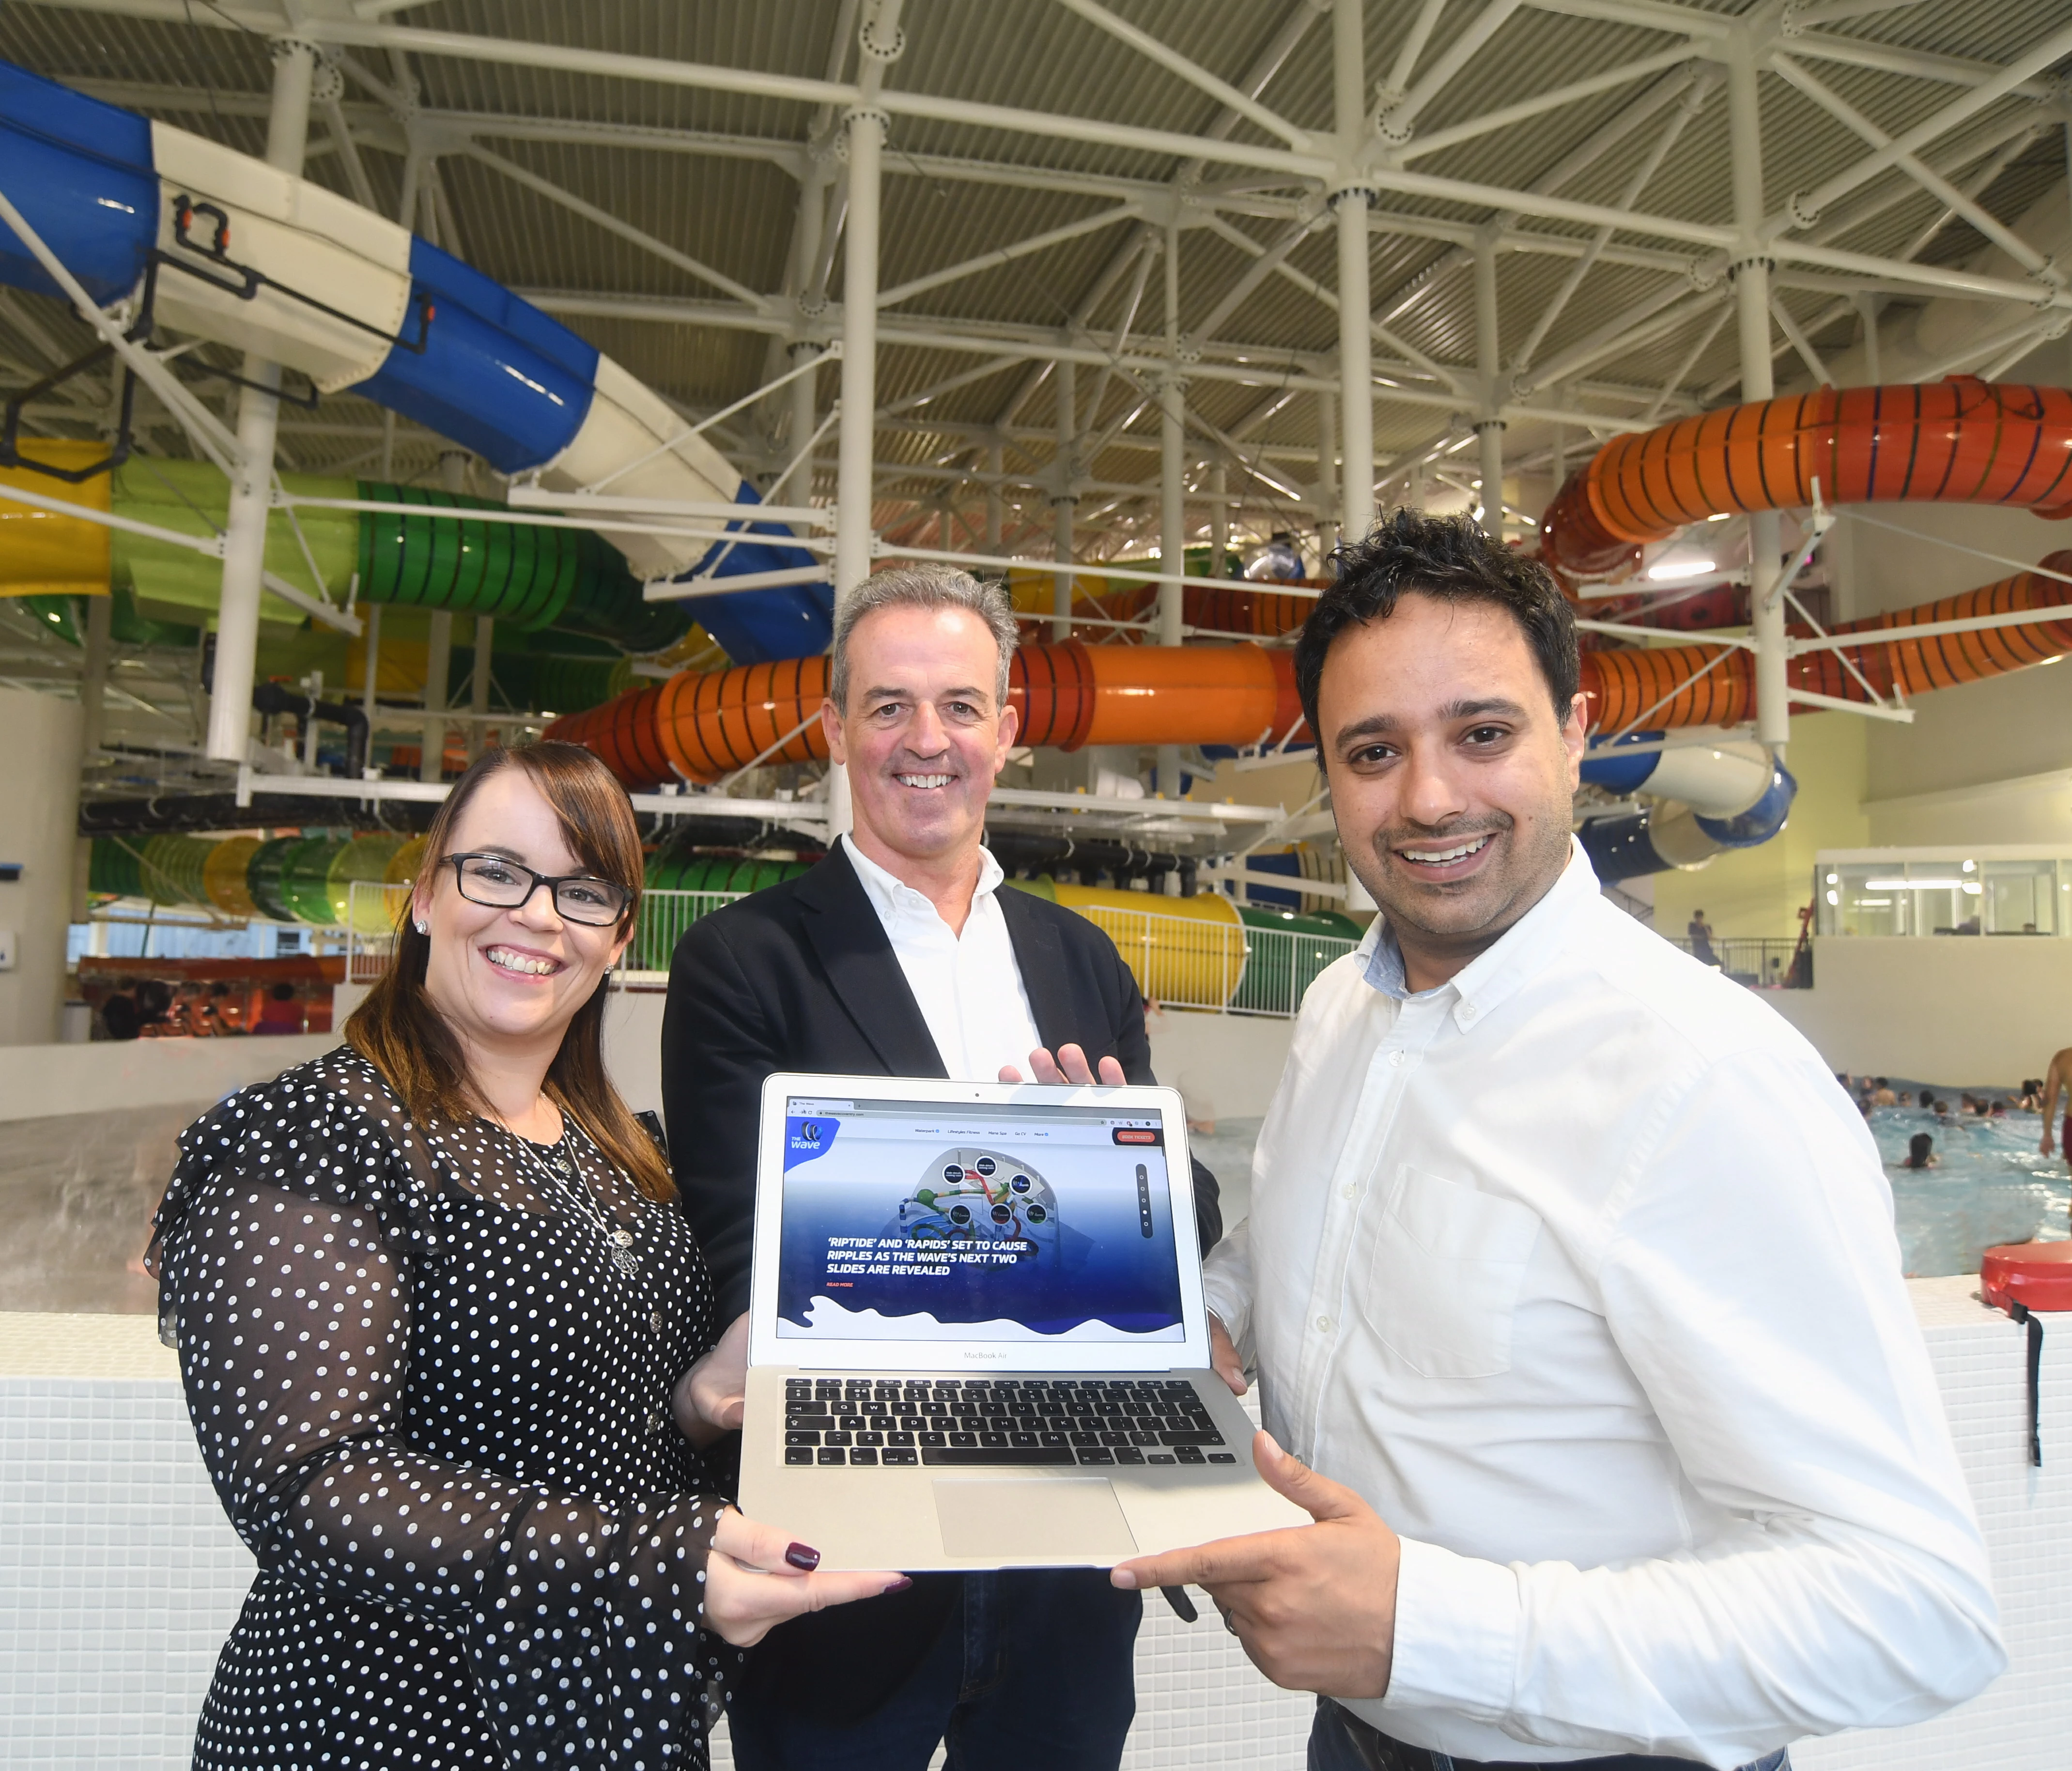 From left: Emily Smith, Marketing and Creative Manager at Image+, Alan Hartin, founder of Image+, and Aman Surey, Marketing and Communications Manager at CV Life